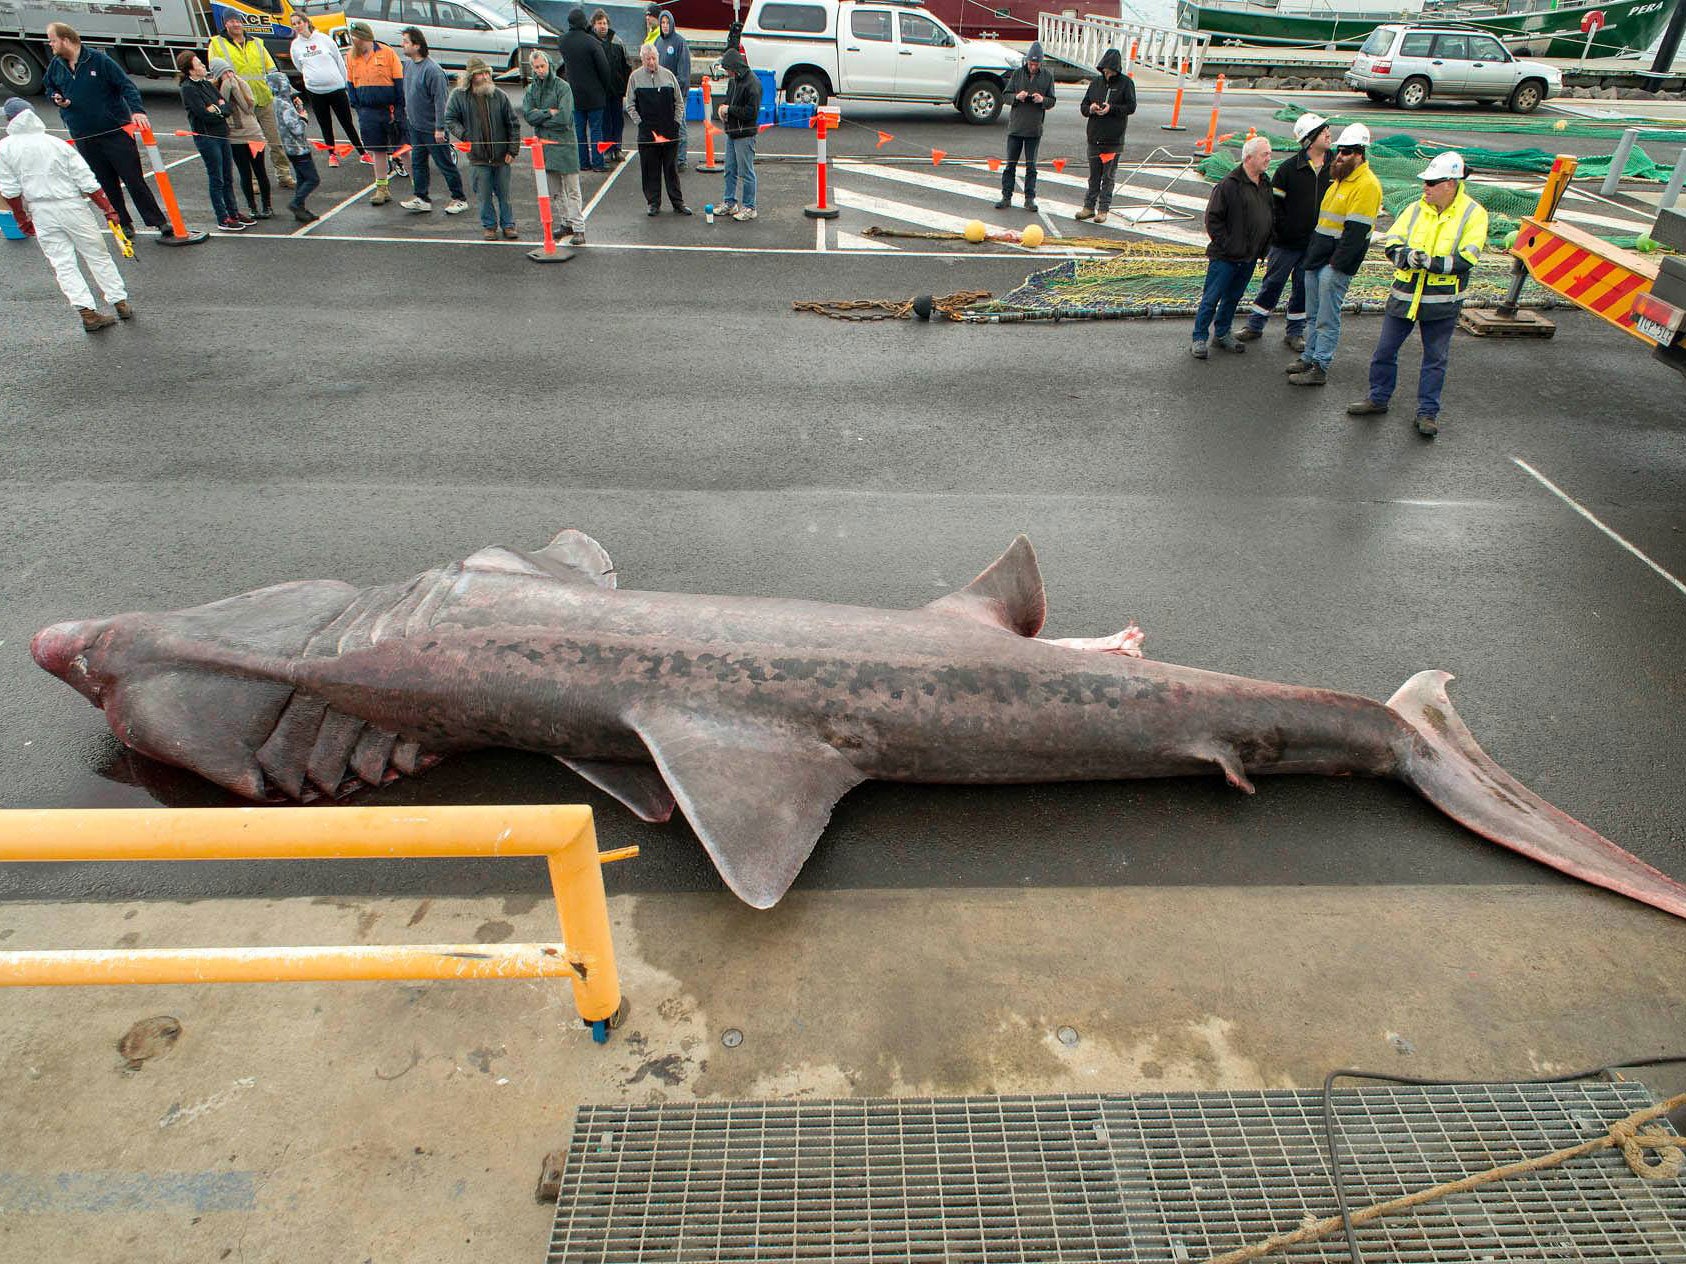 The 6.3m basking shark was caught off the west coast of Victoria